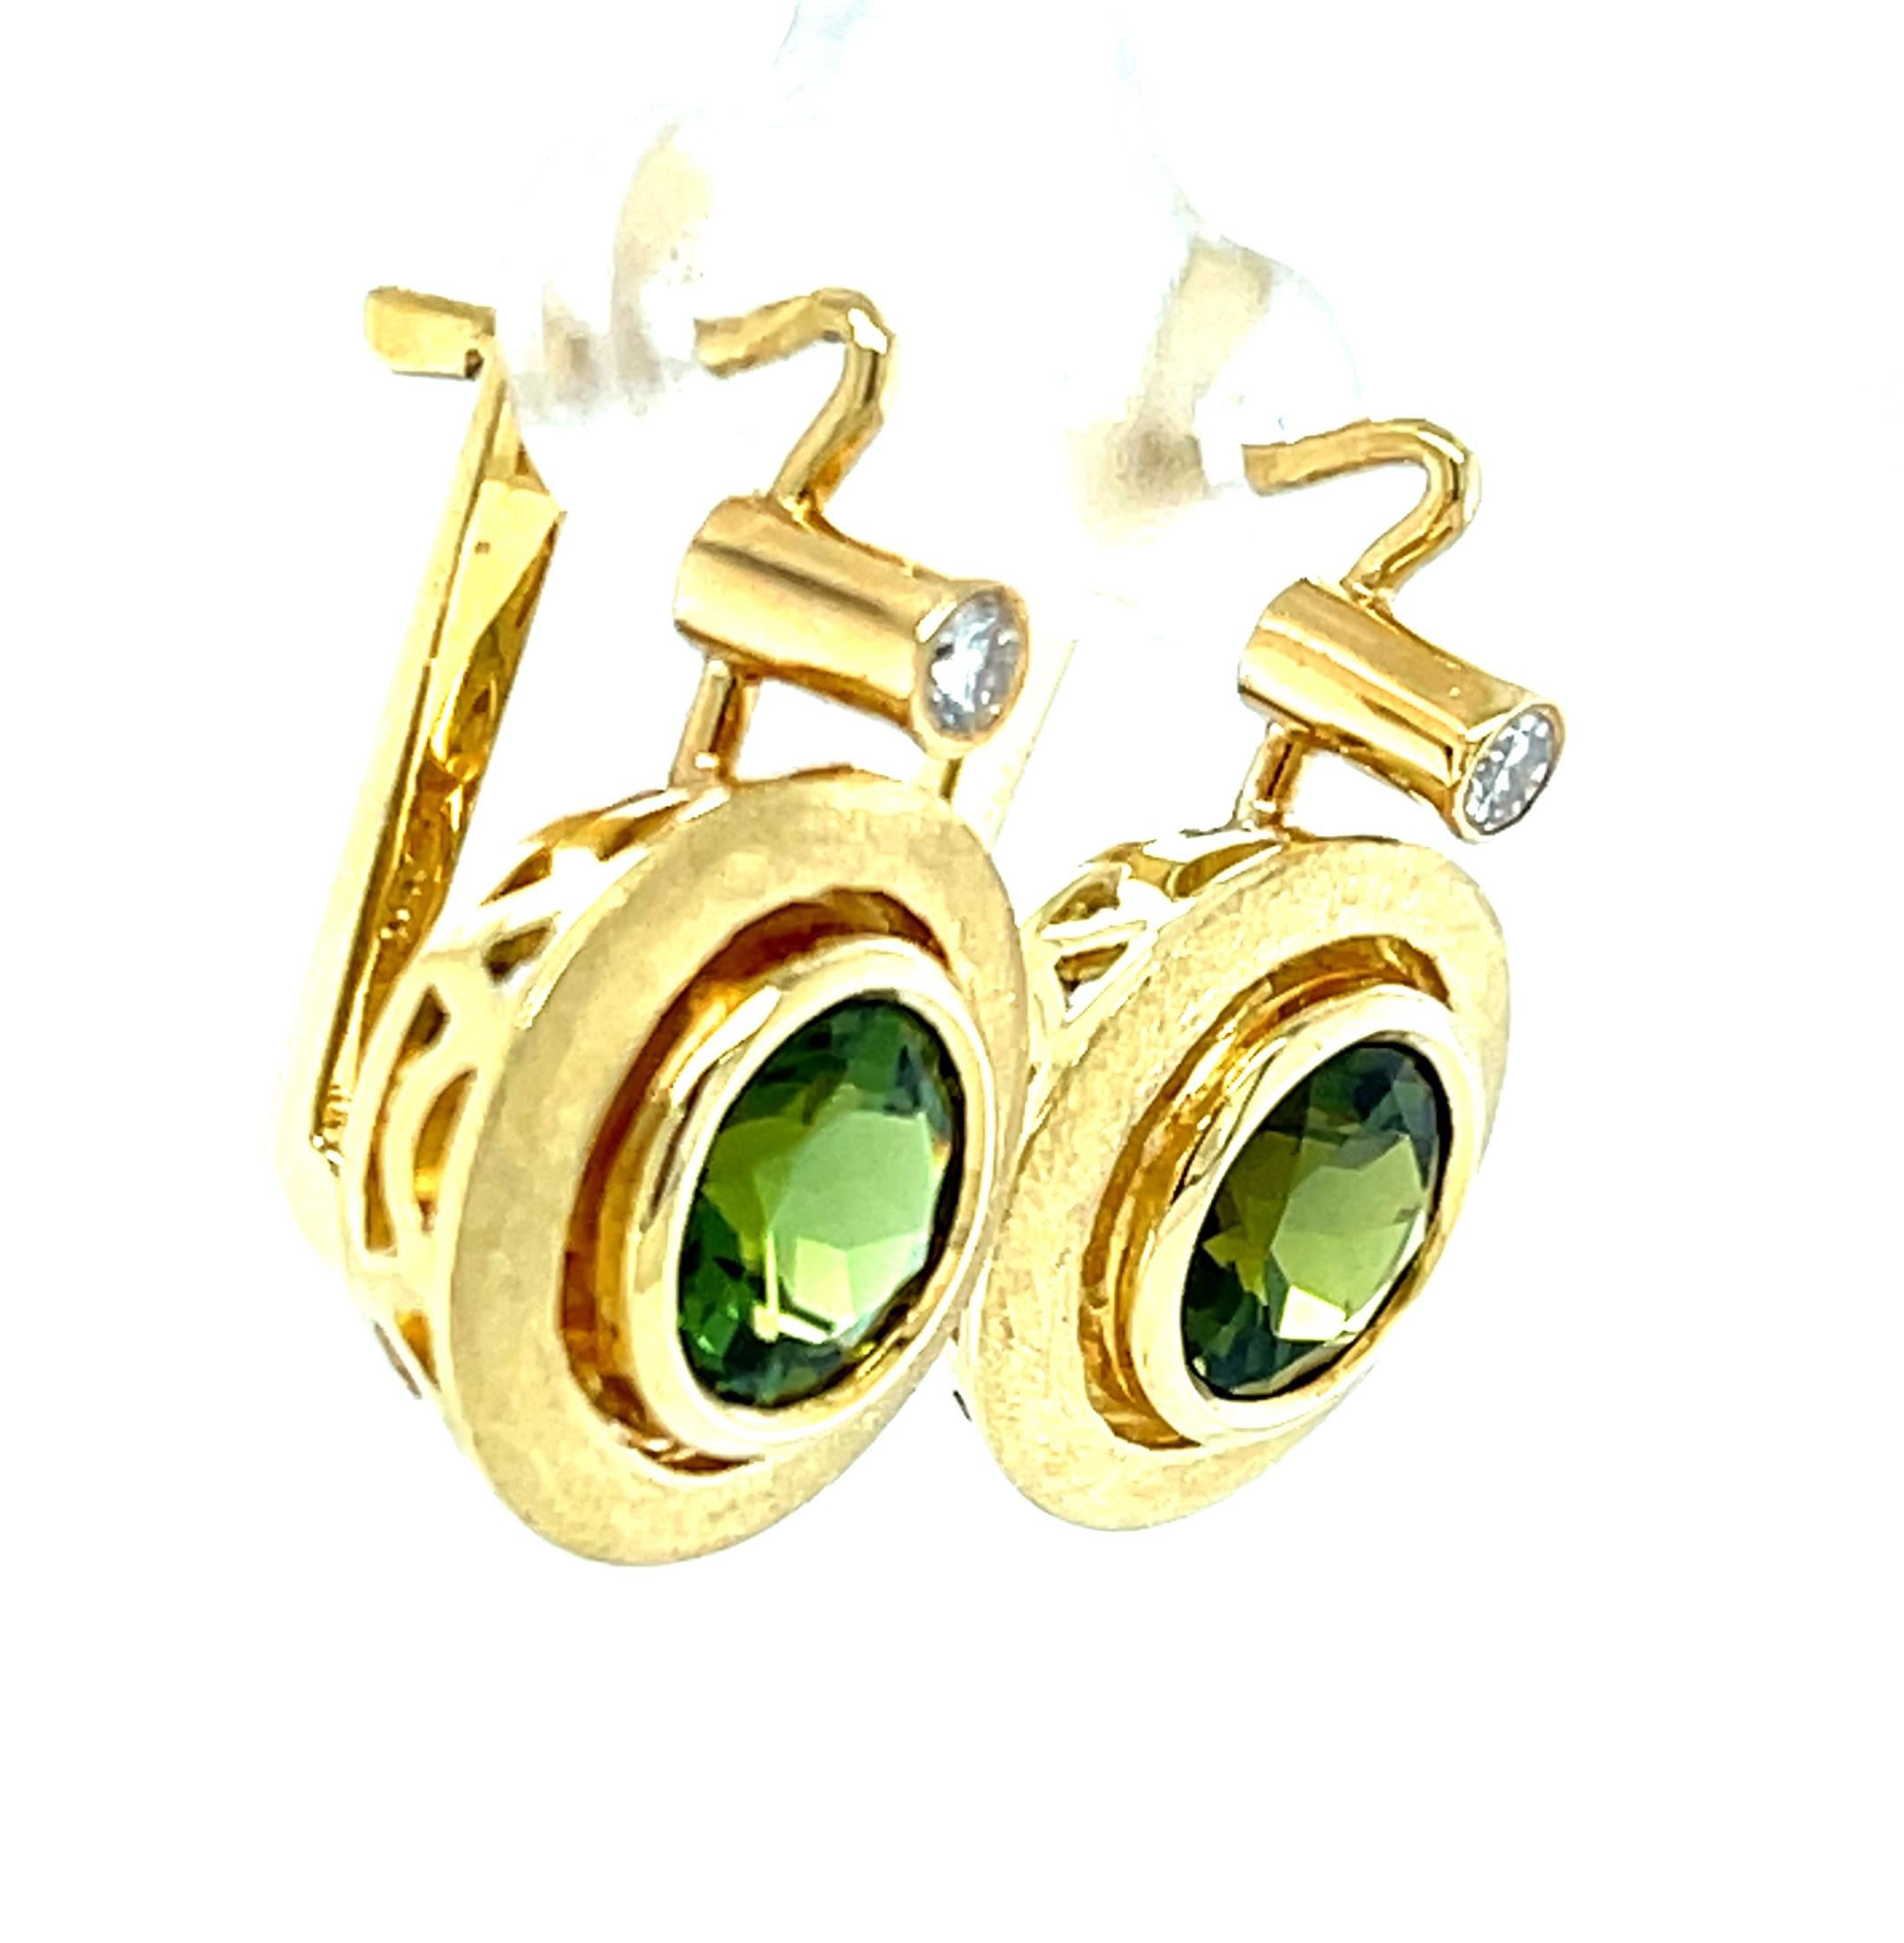 Round Cut 3.55 Carat Total Green Tourmaline and Diamond Drop Earrings in Yellow Gold For Sale